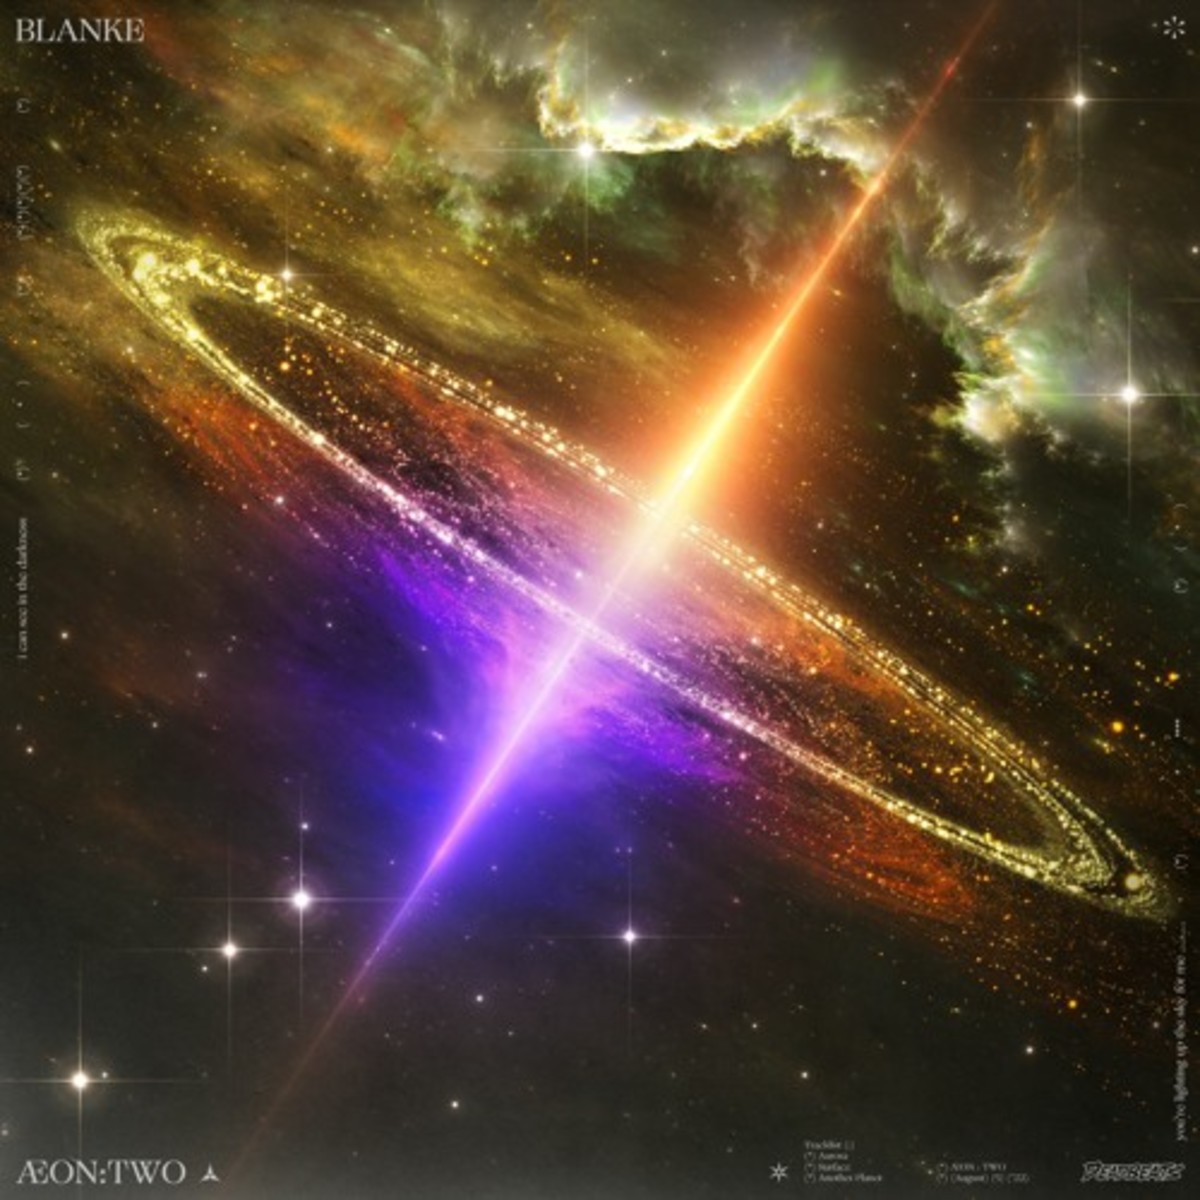 Another Planet - Blanke